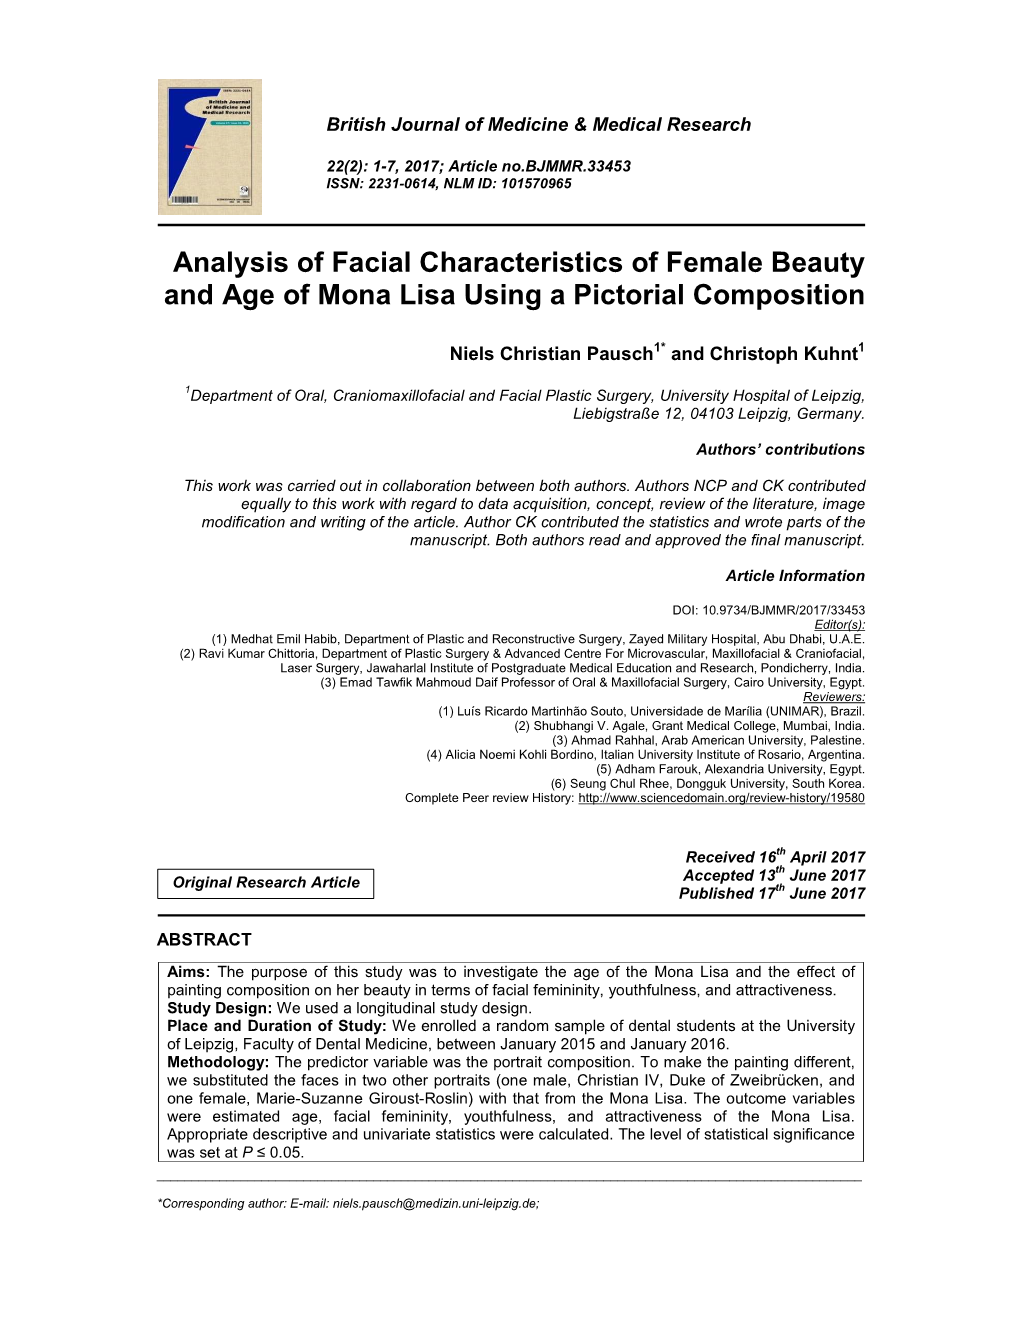 Analysis of Facial Characteristics of Female Beauty and Age of Mona Lisa Using a Pictorial Composition